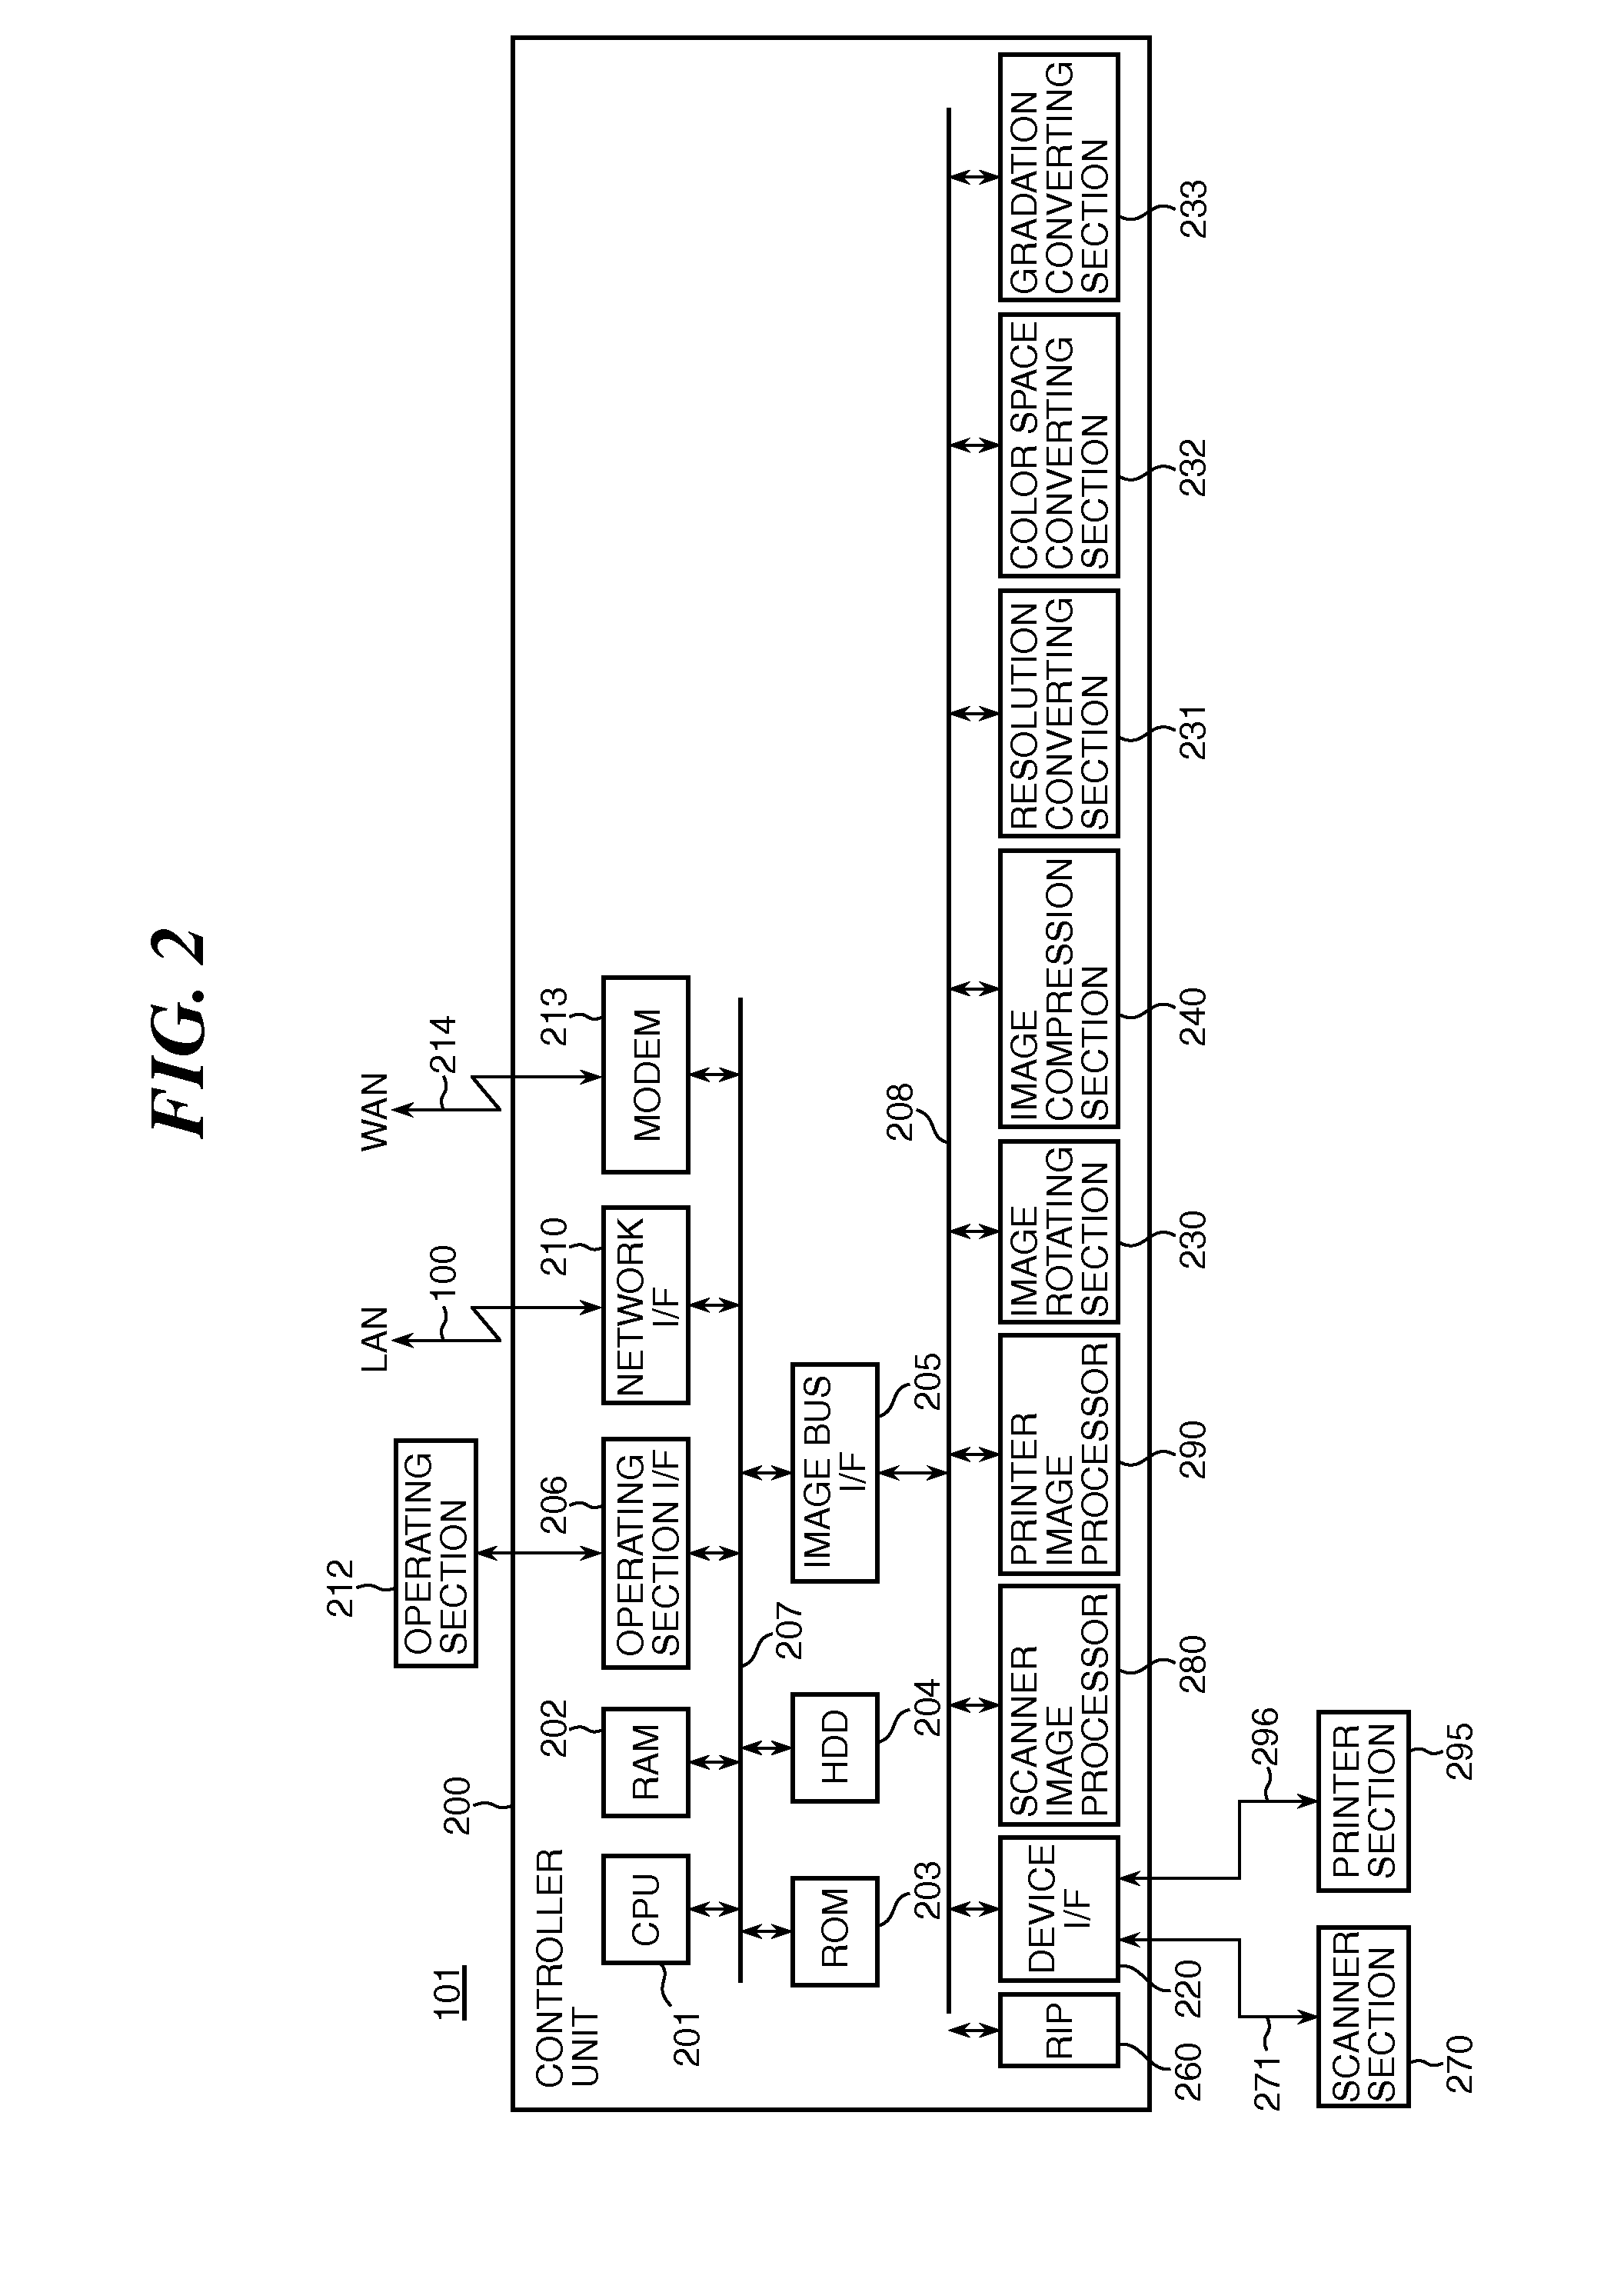 Image processing apparatus for executing a process flow, method of controlling the same and storage medium